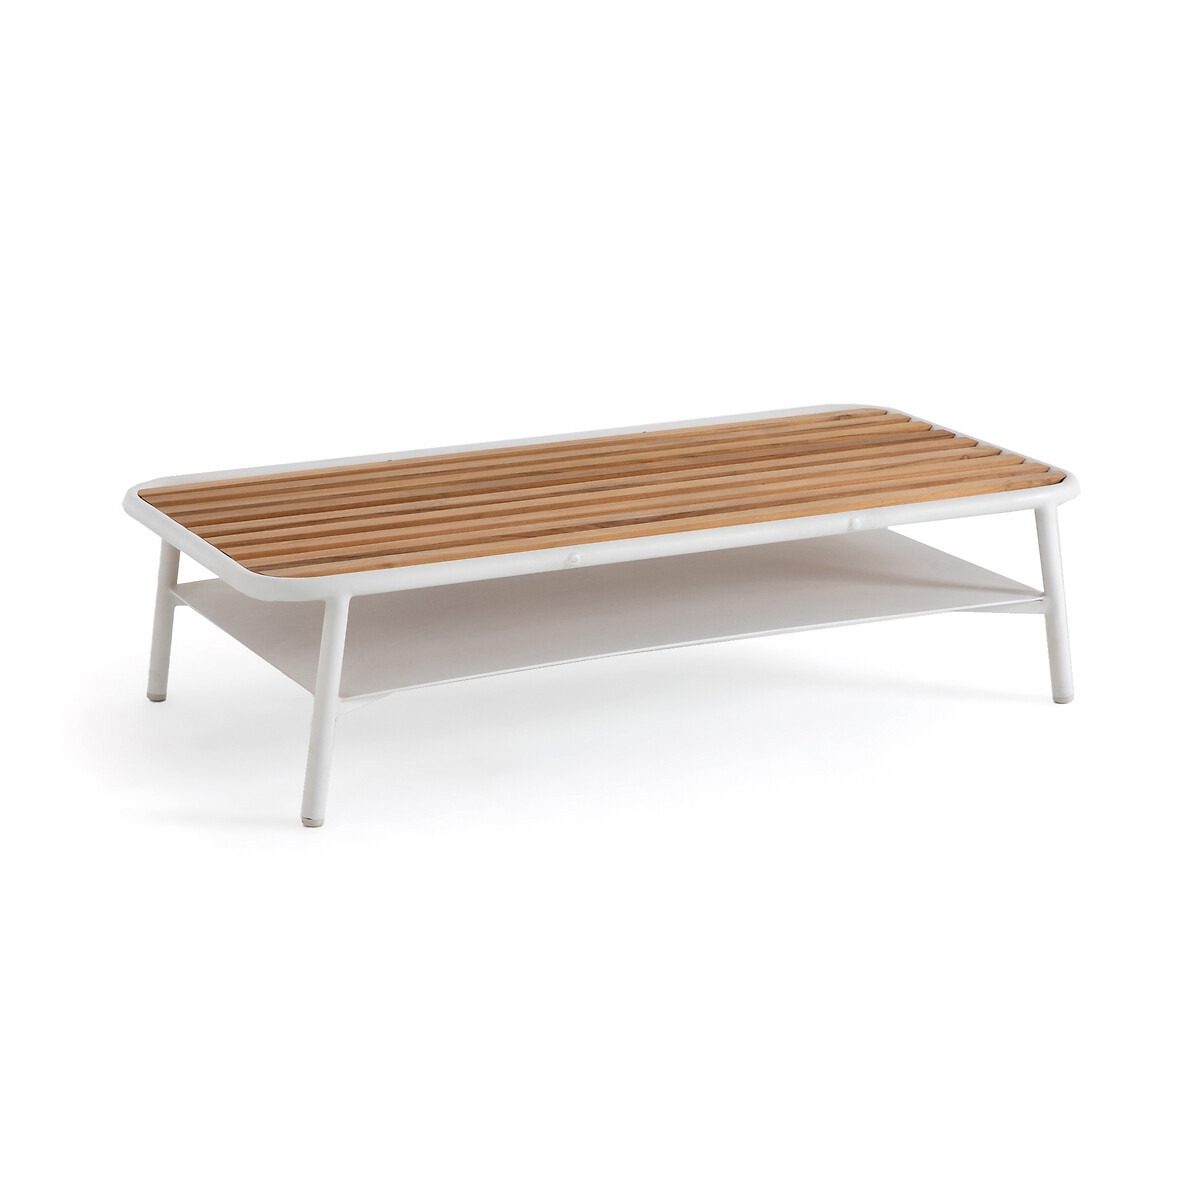 Isabbo 2-Level Garden Coffee Table - image 1